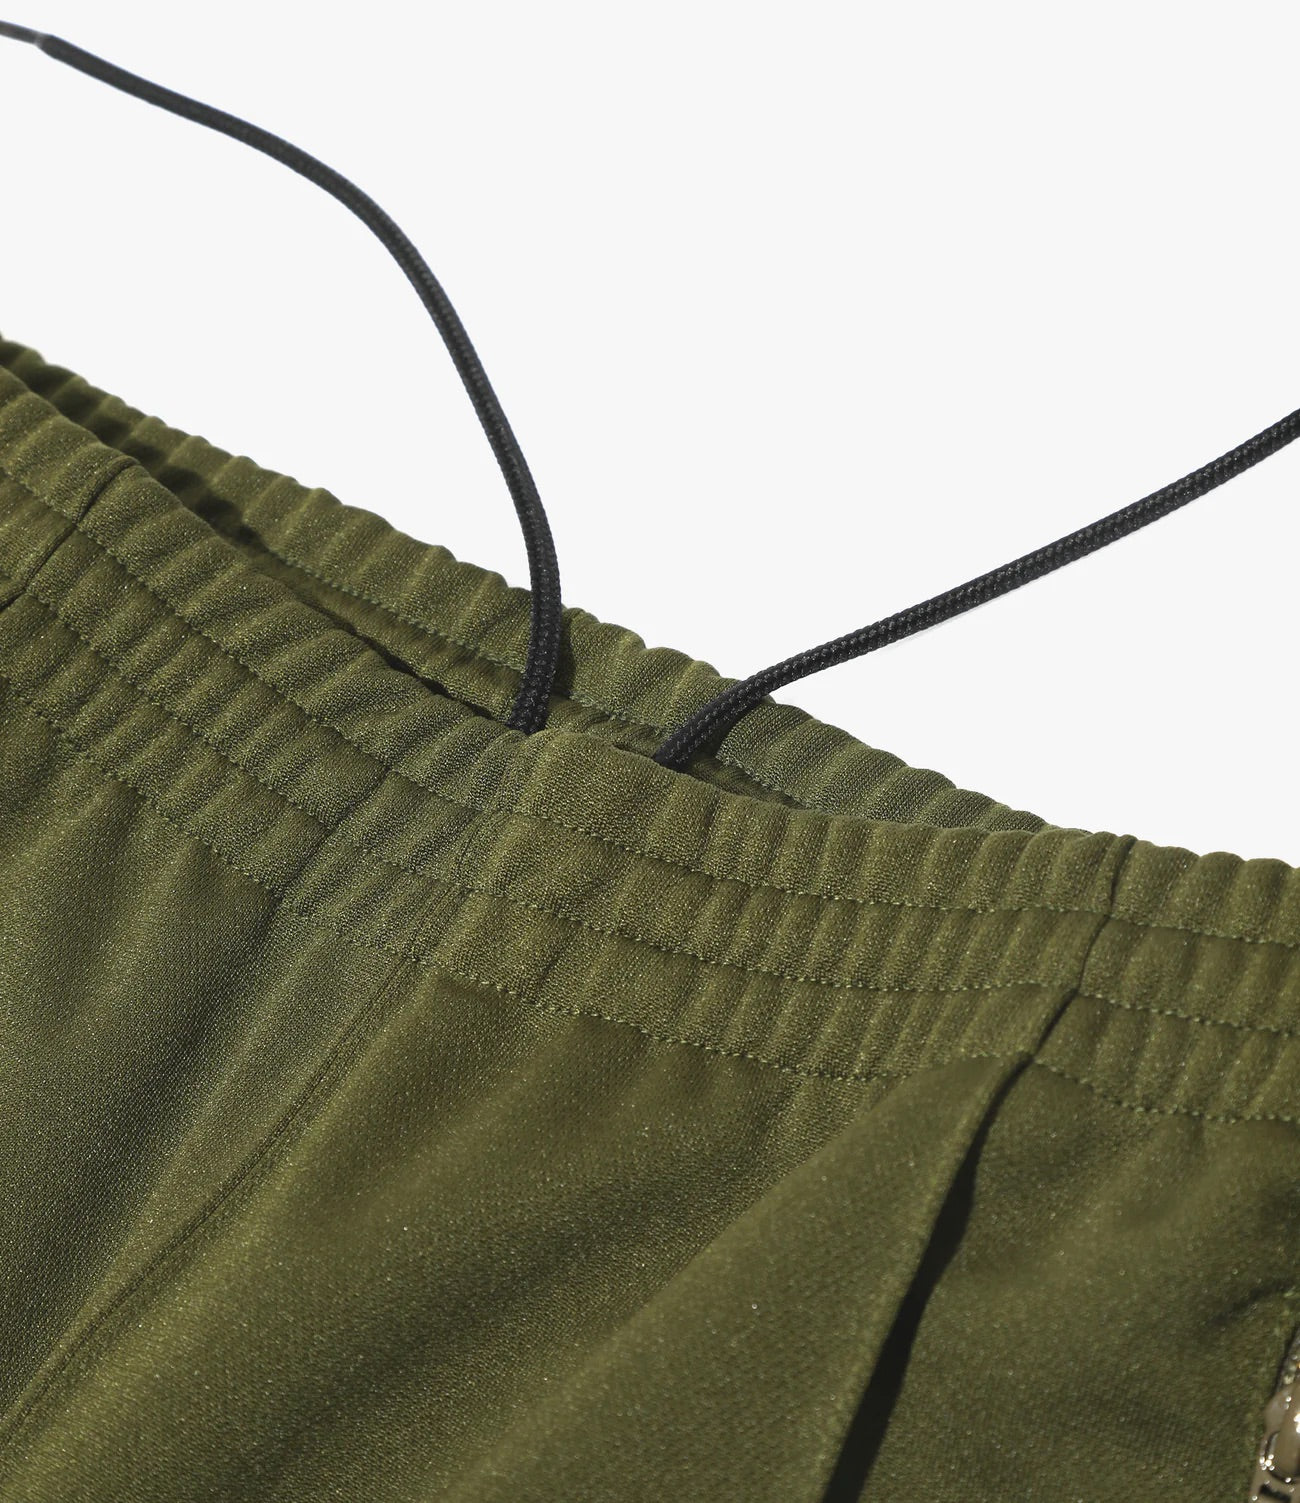 Needles - H.D. Track Pant - Poly Smooth - Olive